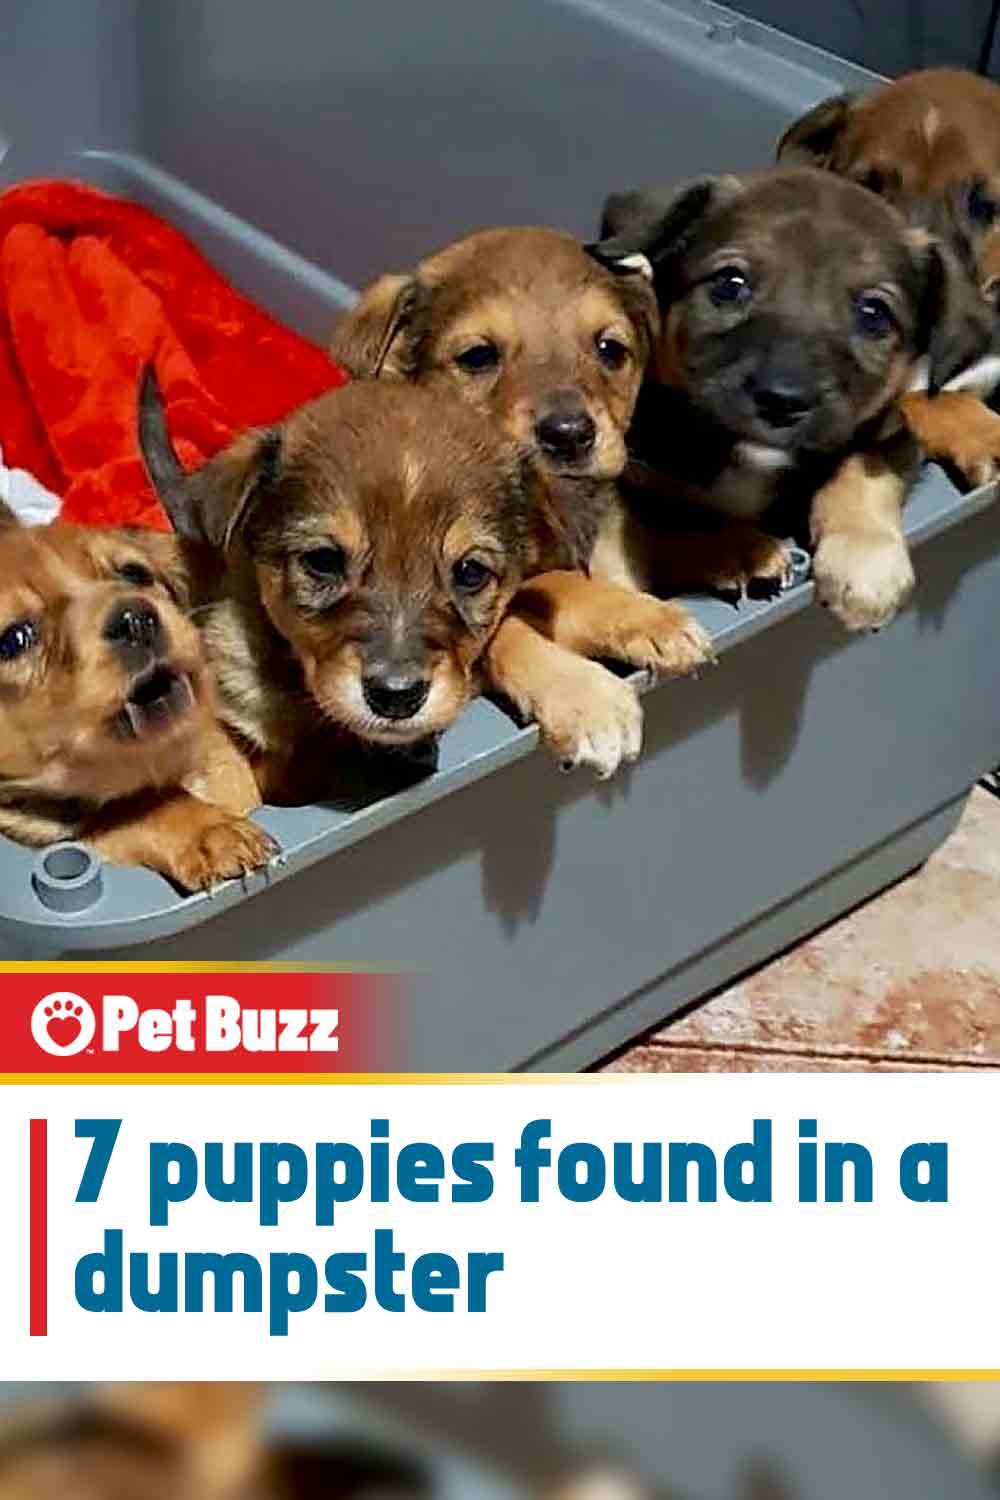 7 puppies found in a dumpster